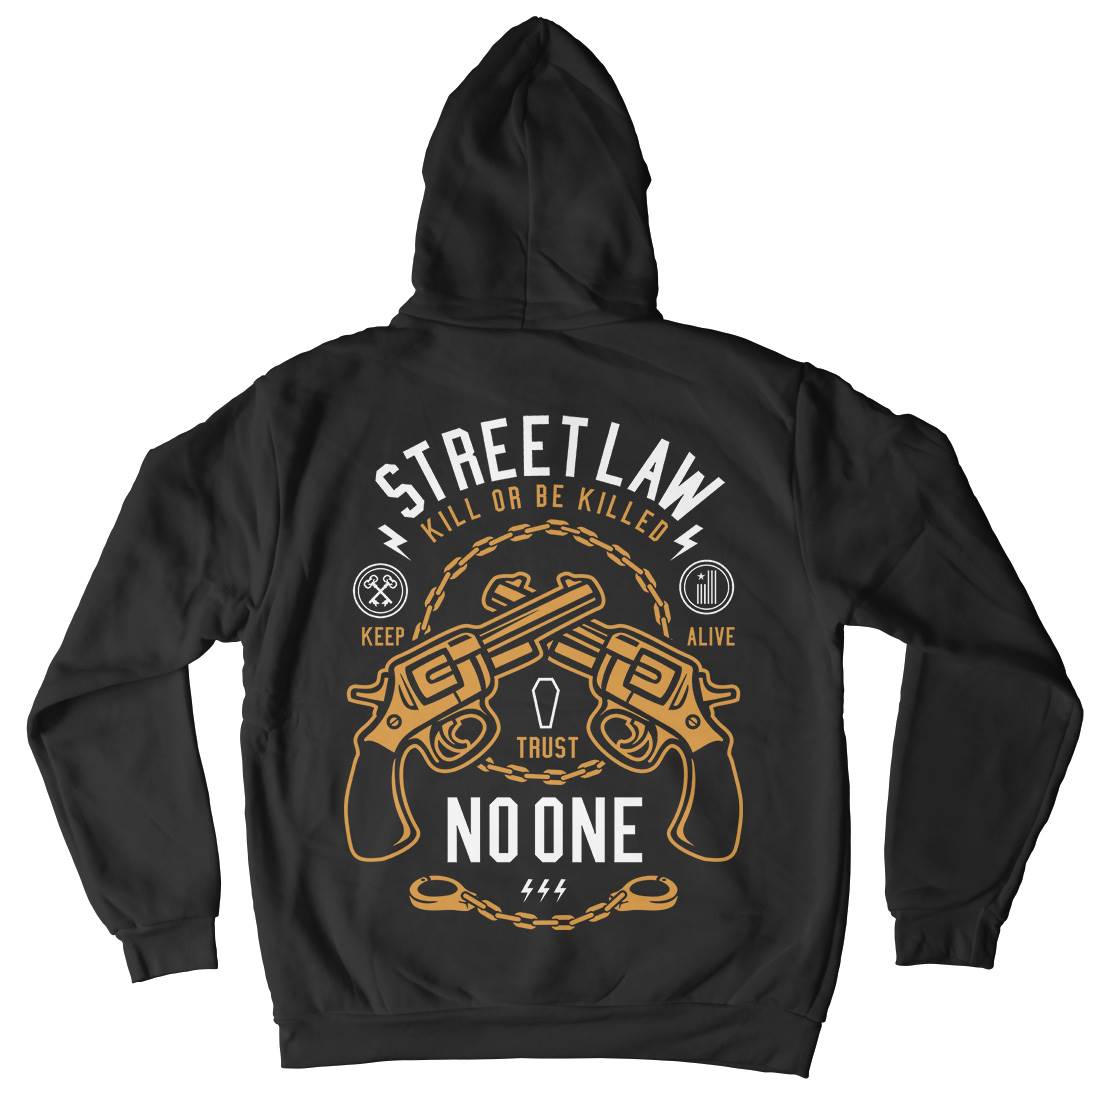 Street Law Kids Crew Neck Hoodie Quotes A286